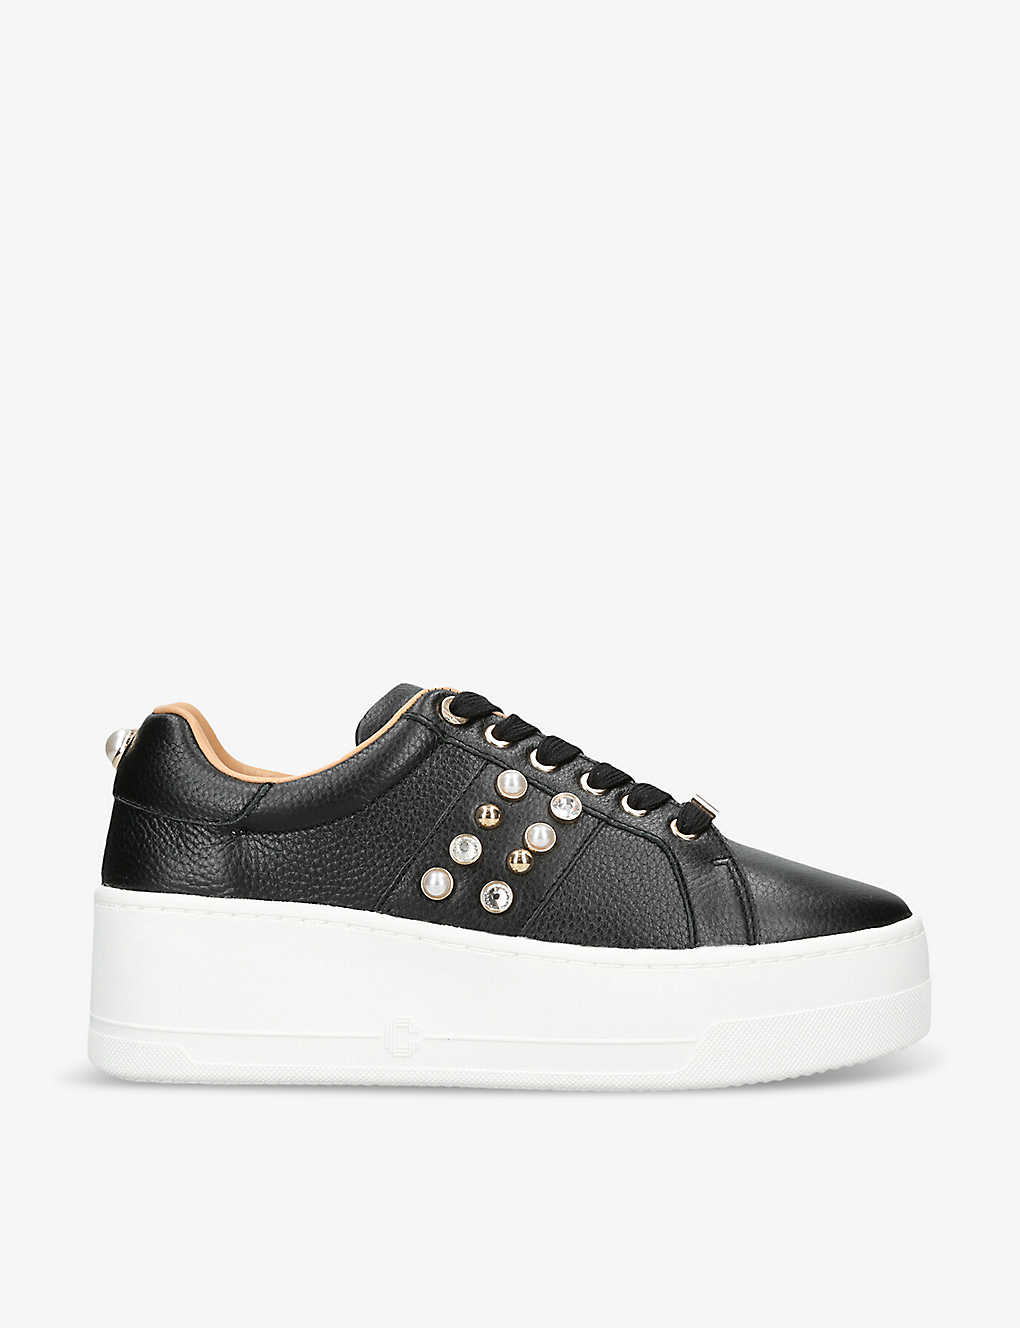 Carvela Womens Black Precious Studded Leather Low-top Trainers